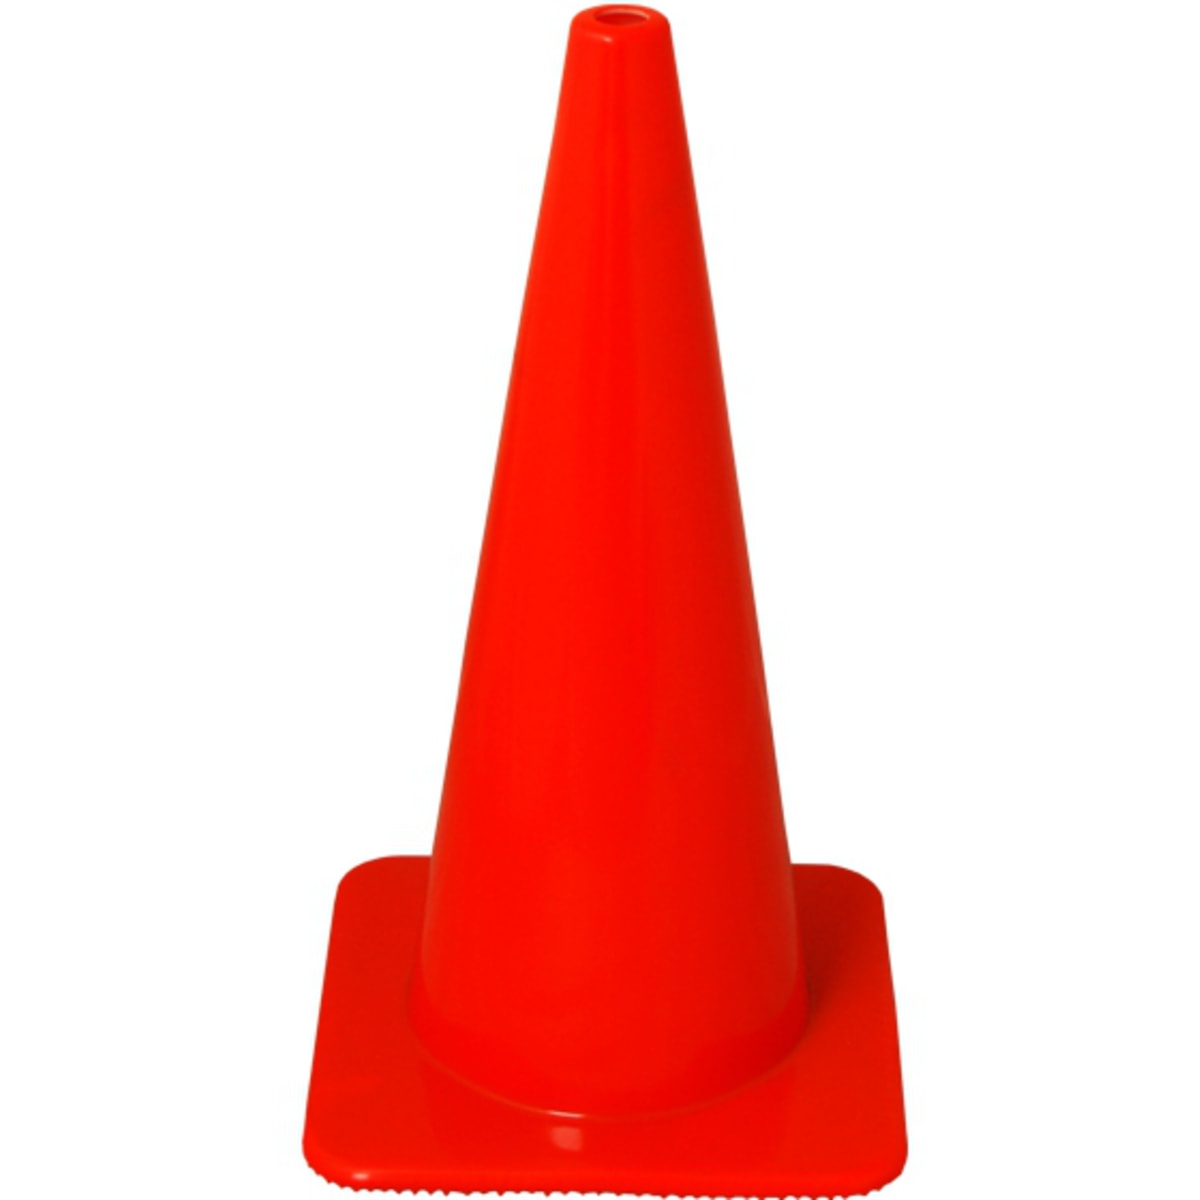 Street Cones 2 Pack Church Parking Cones Construction Cones Parking Cones Safety Cones 28 Yellow Cones with Church Parking Signs